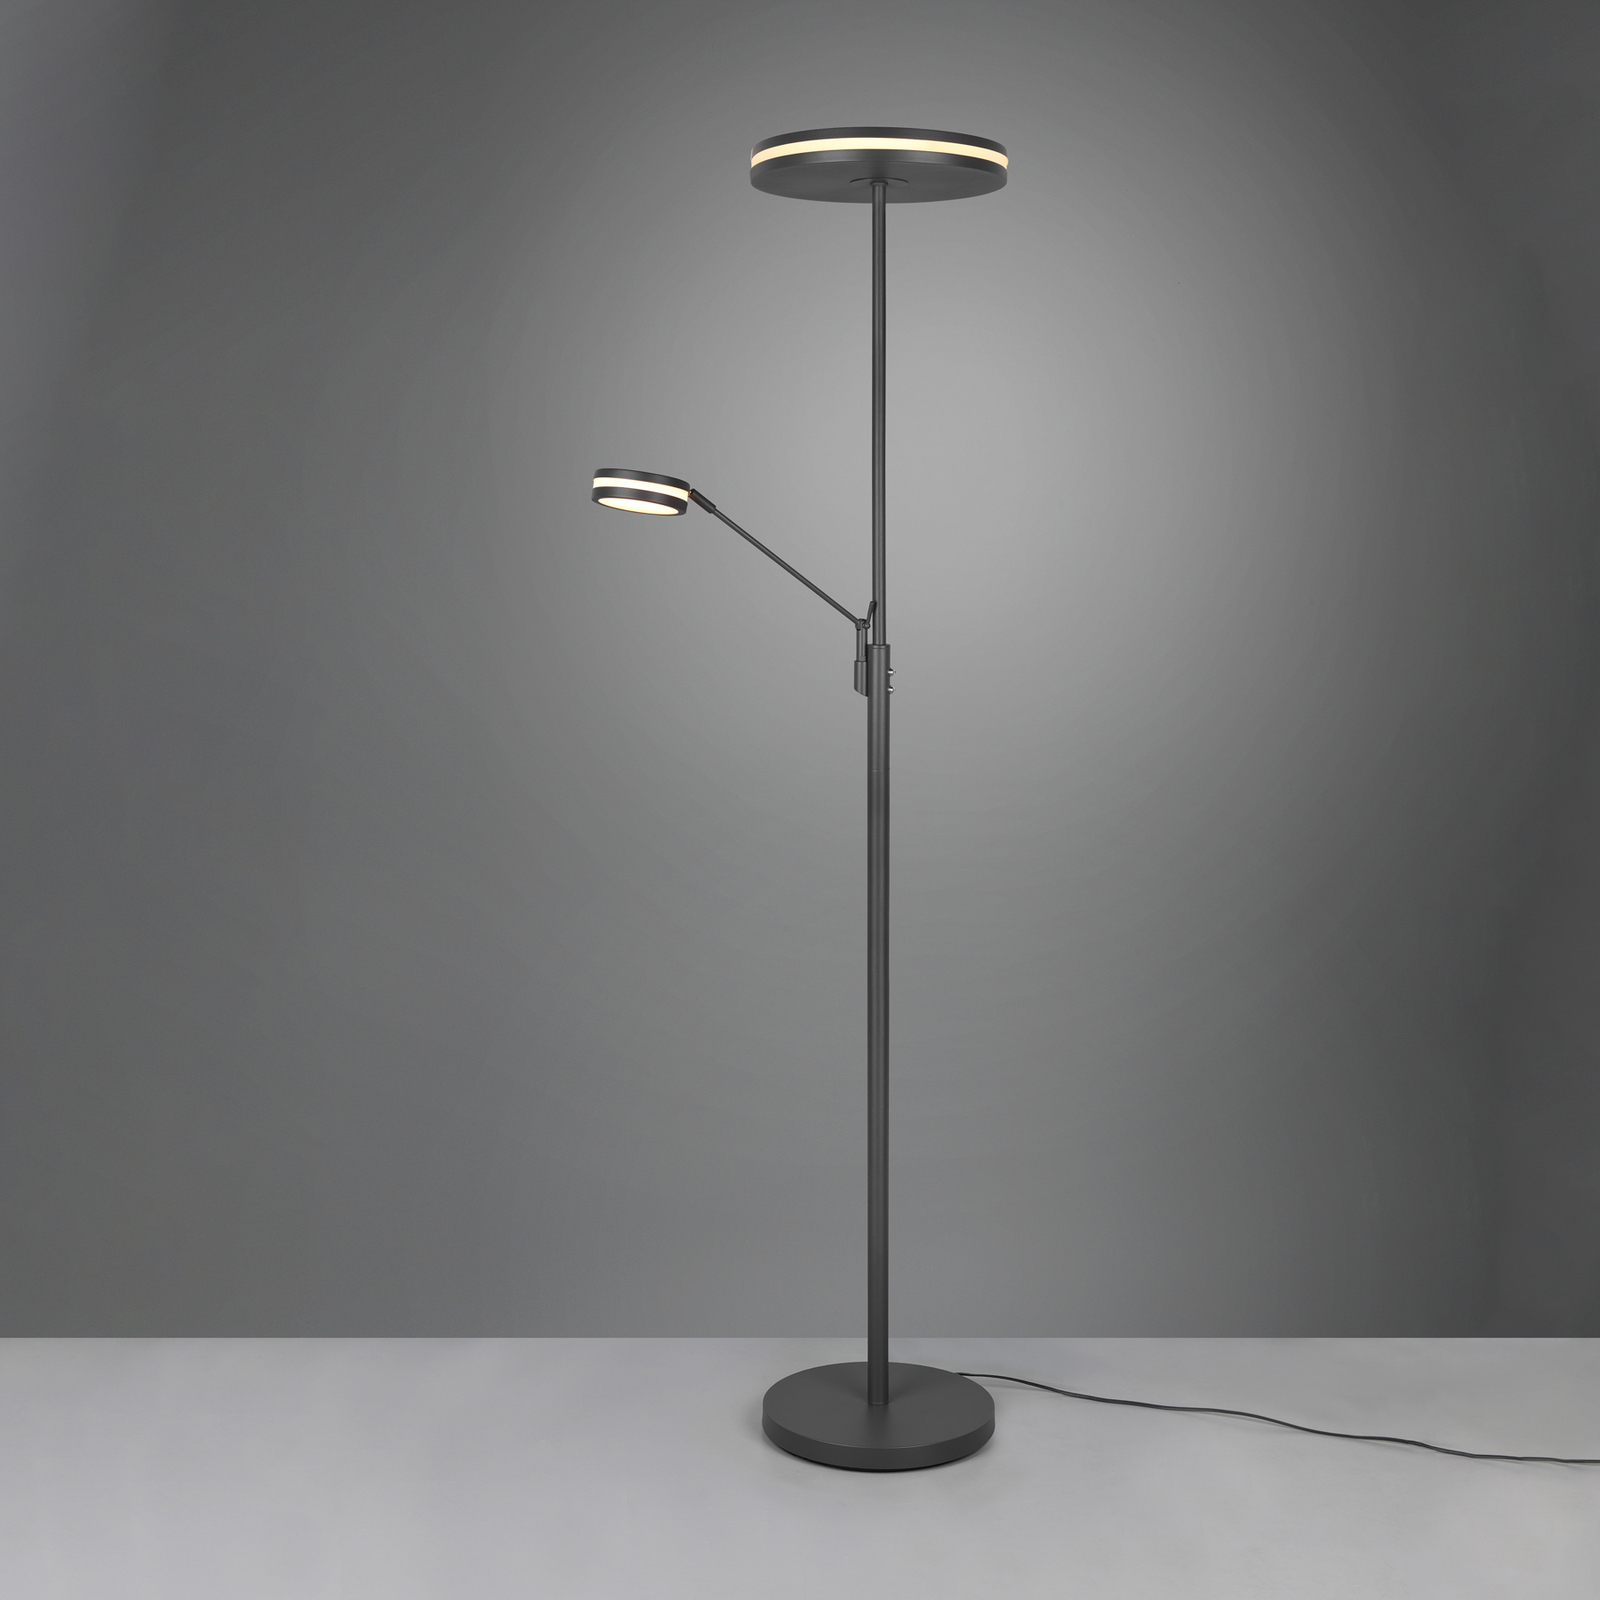 Lampadaire LED Franklin, liseuse, anthracite